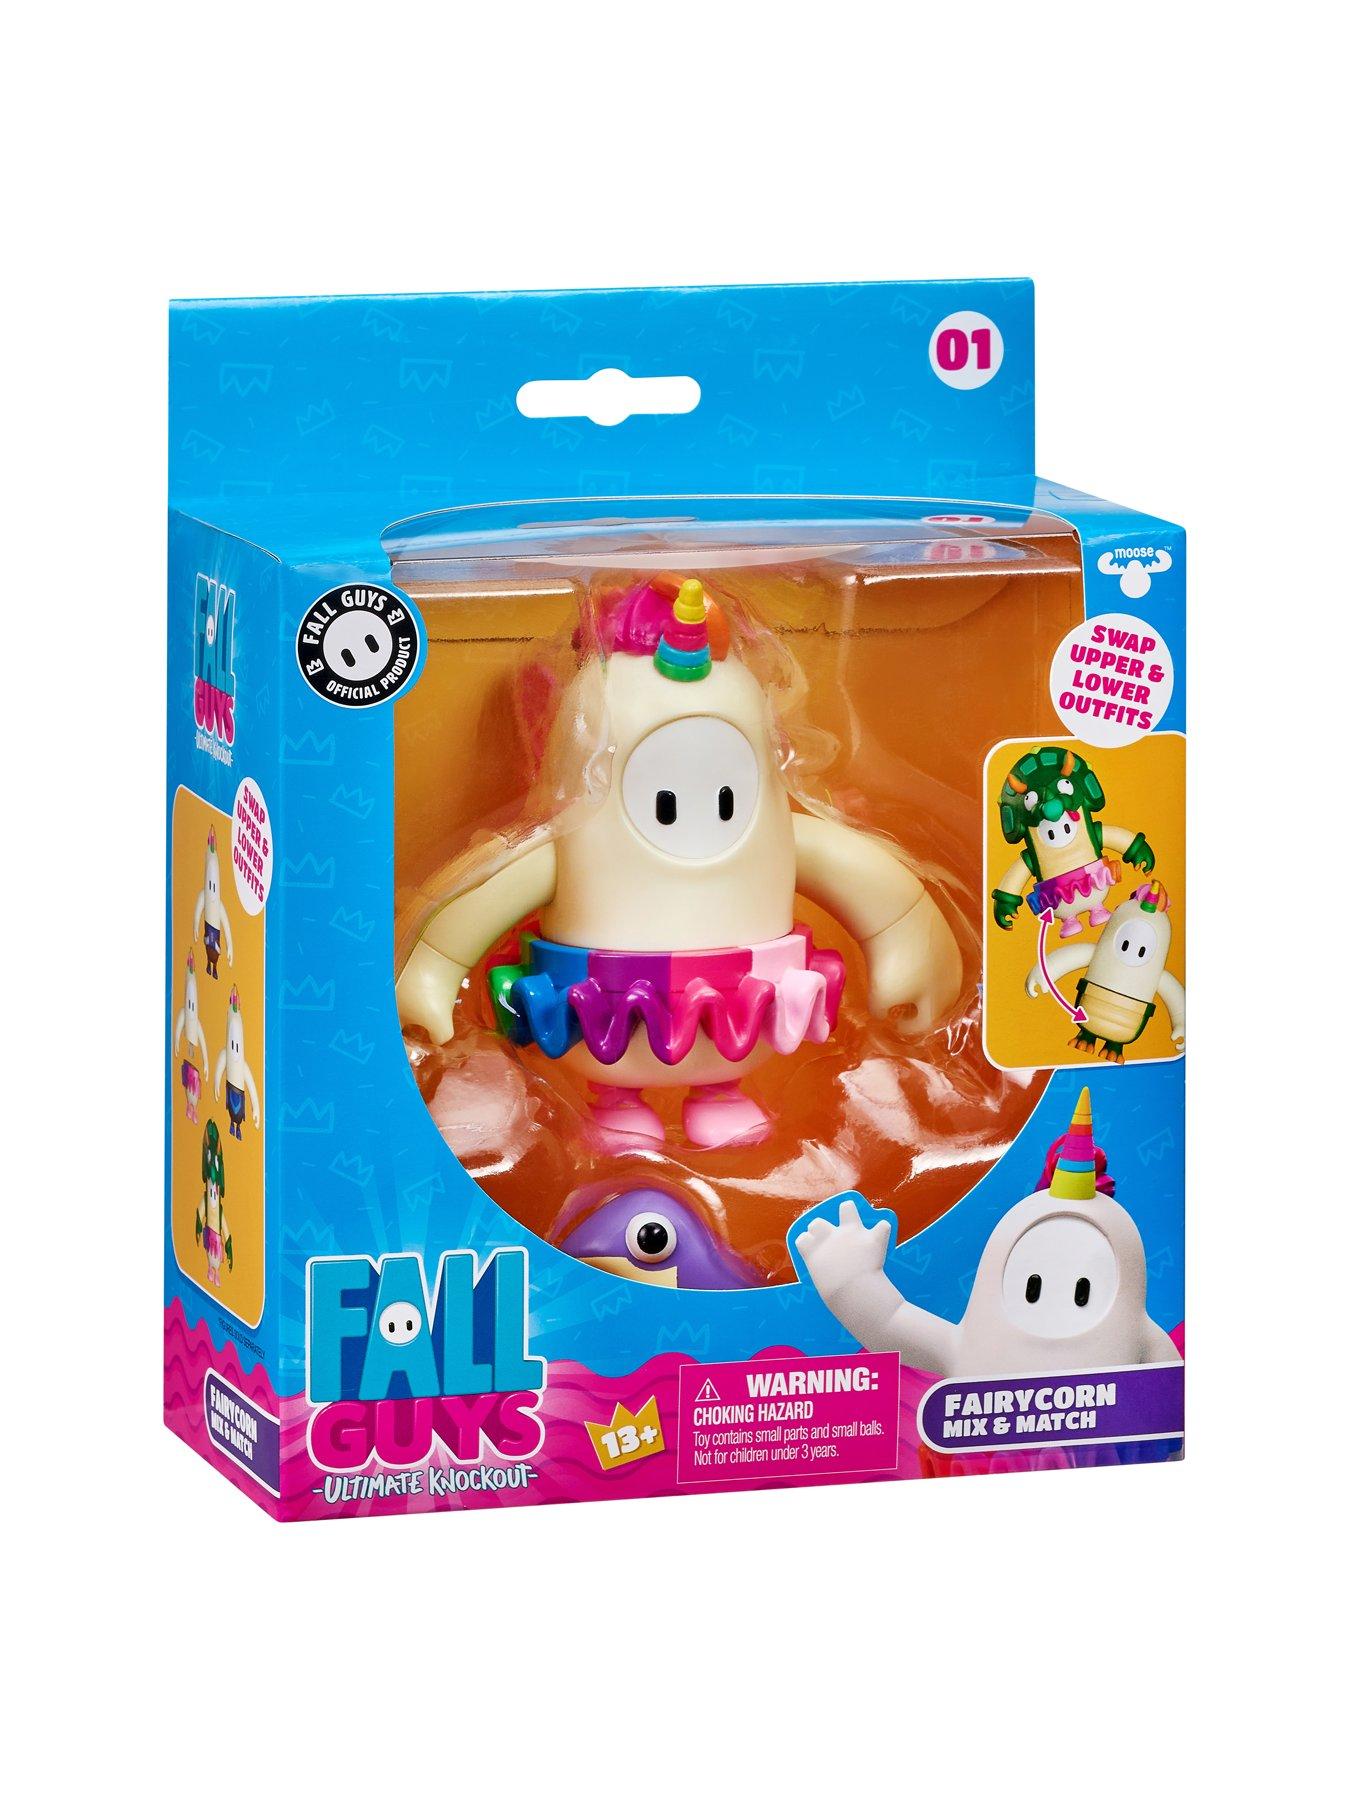 Fall Guys - Ultimate Knockout Mix & Match Action Figure - Fairycorn